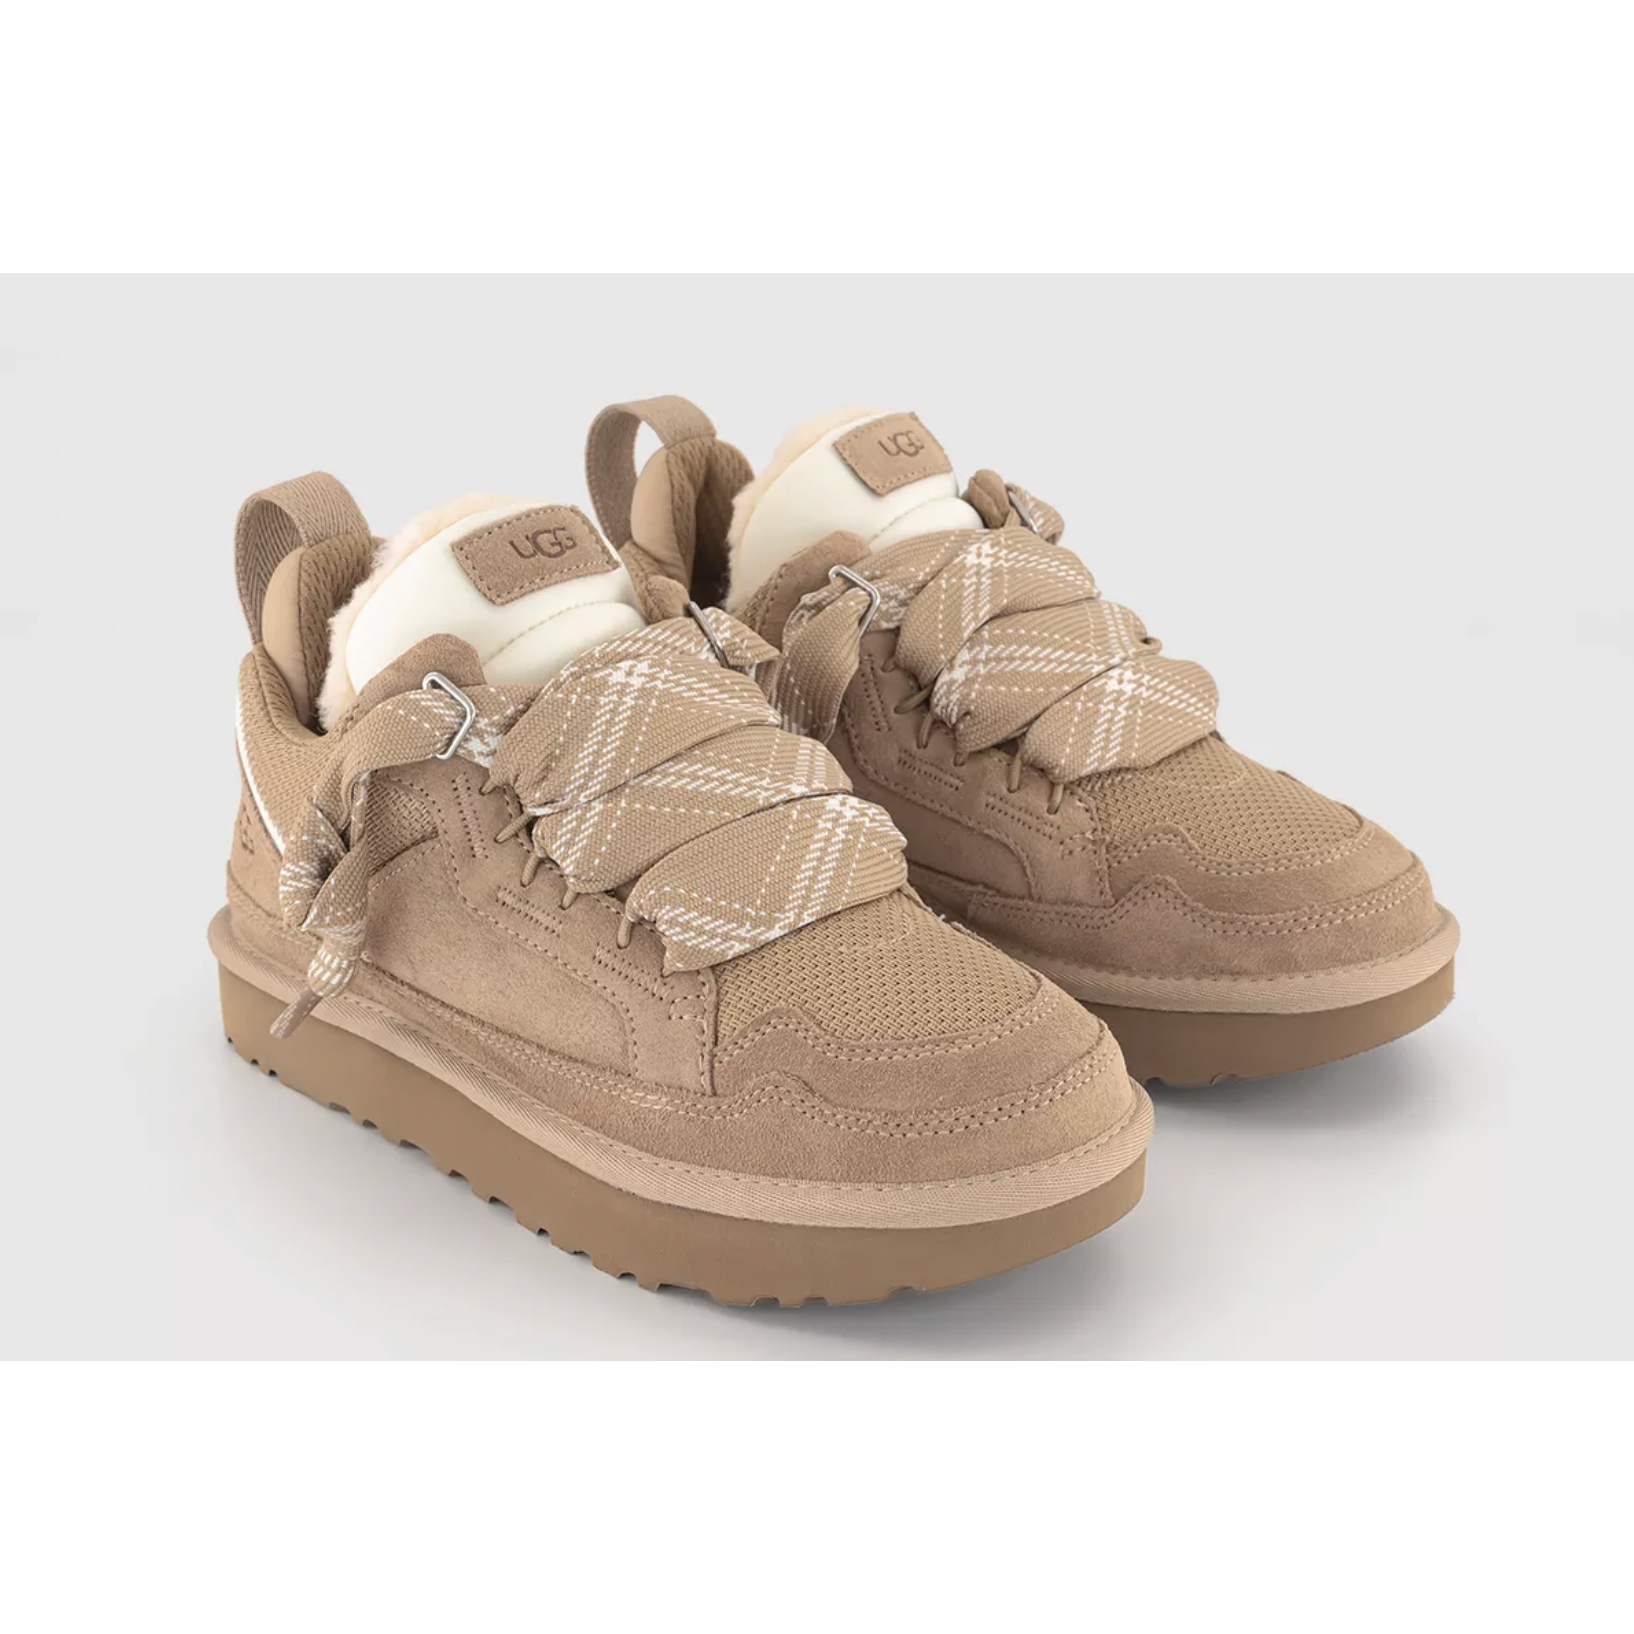 UGG Lowmel Trainer Sand by UGG from £225.00